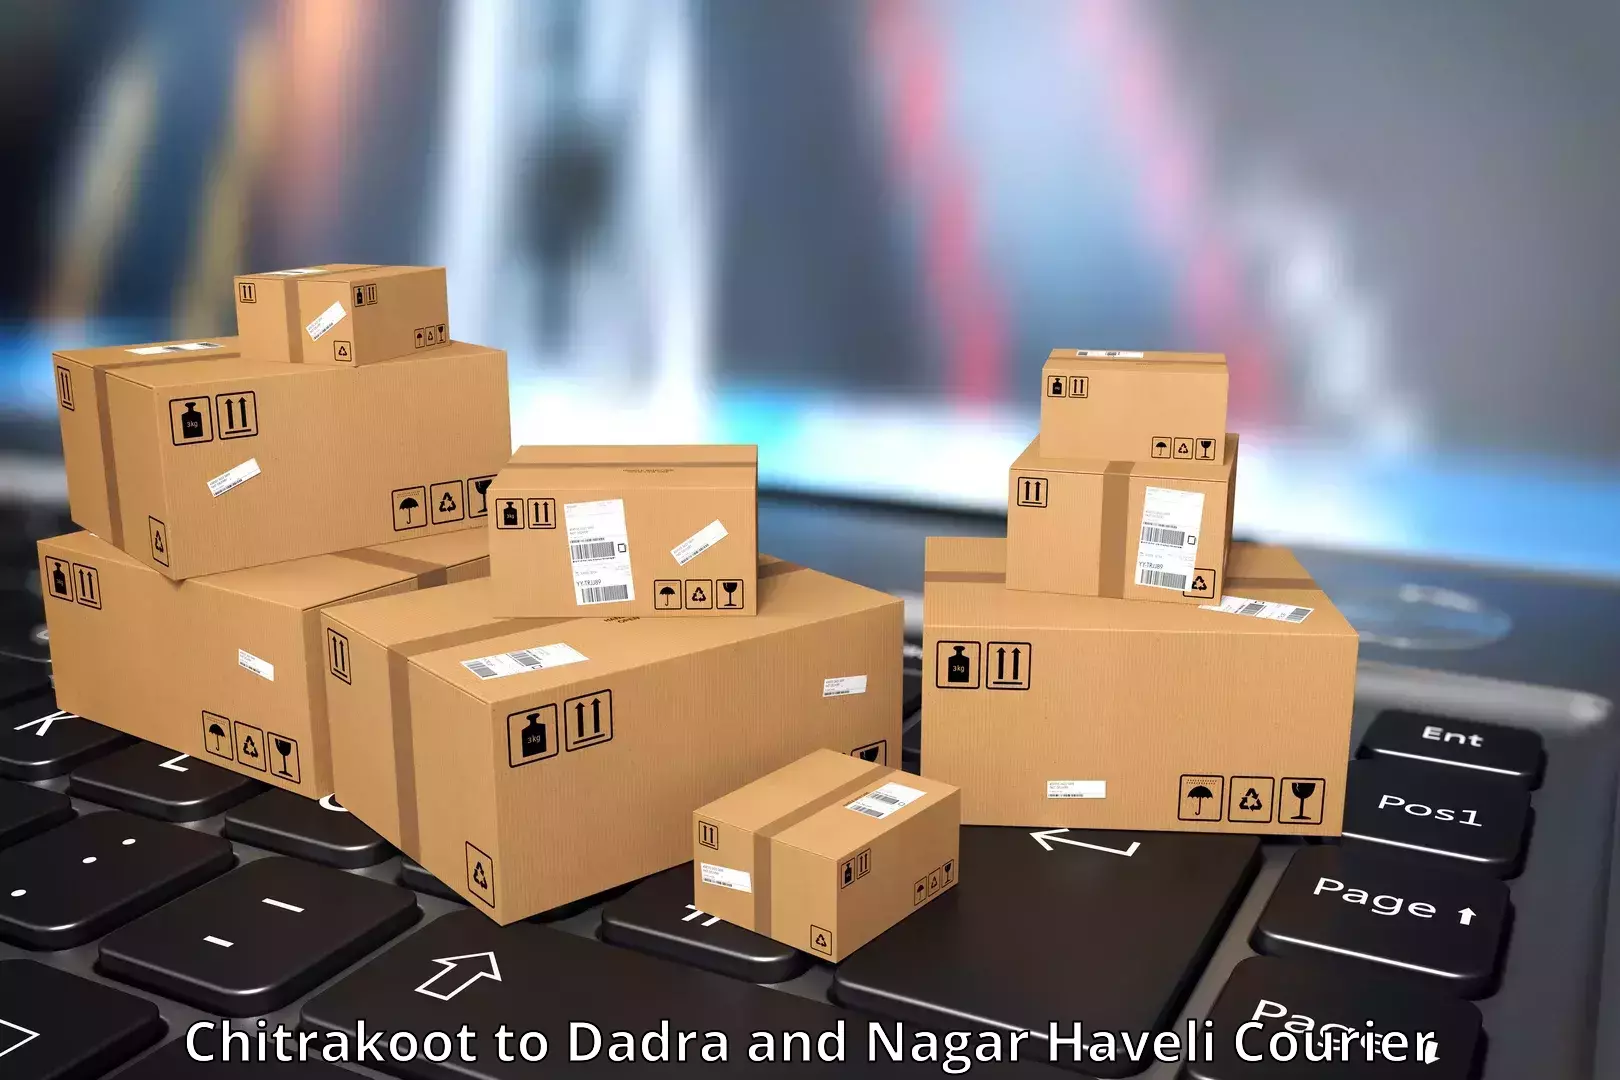 Express delivery network Chitrakoot to Dadra and Nagar Haveli